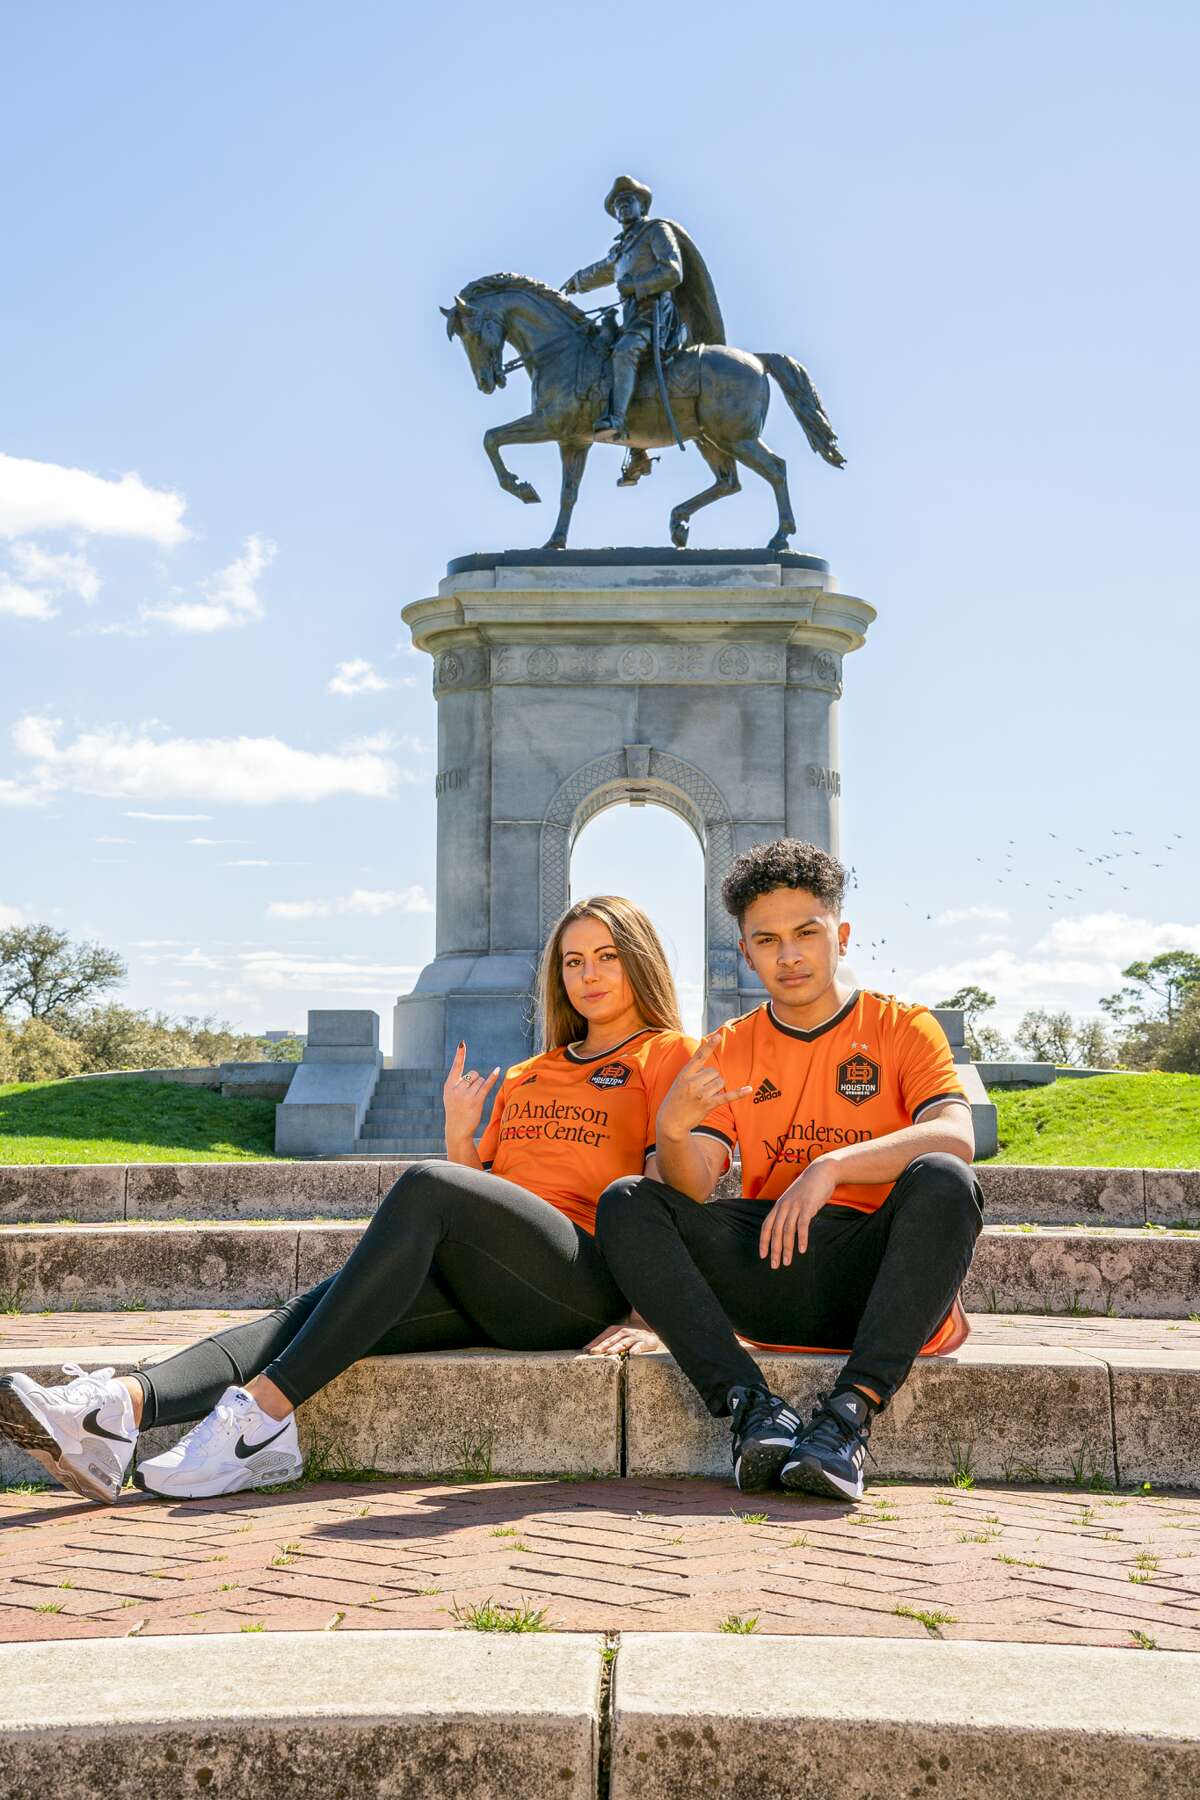 A look at the main kit the Houston Dynamo will wear in the 2021 season.